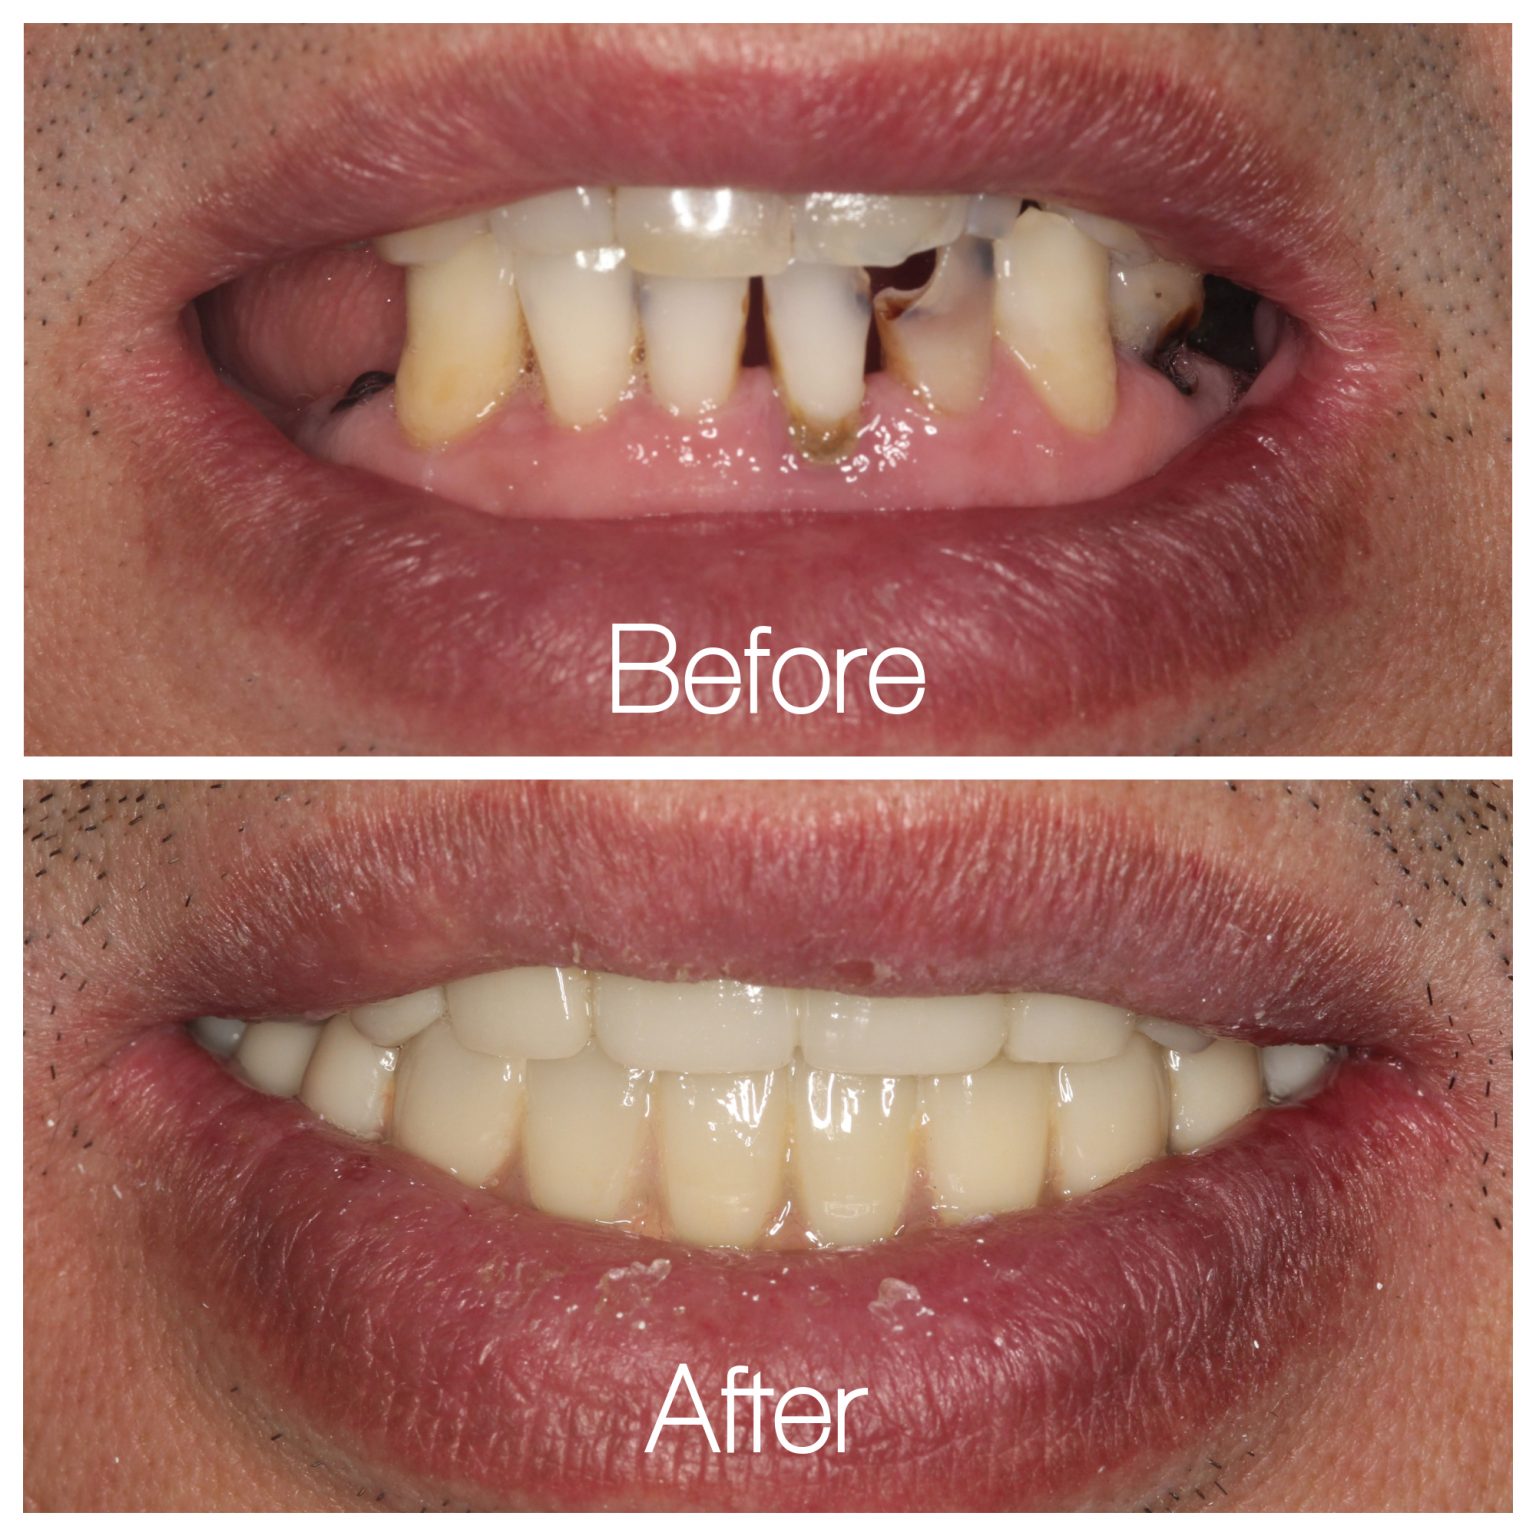 Before and After: Successful full mouth implants/restoration! | Dental